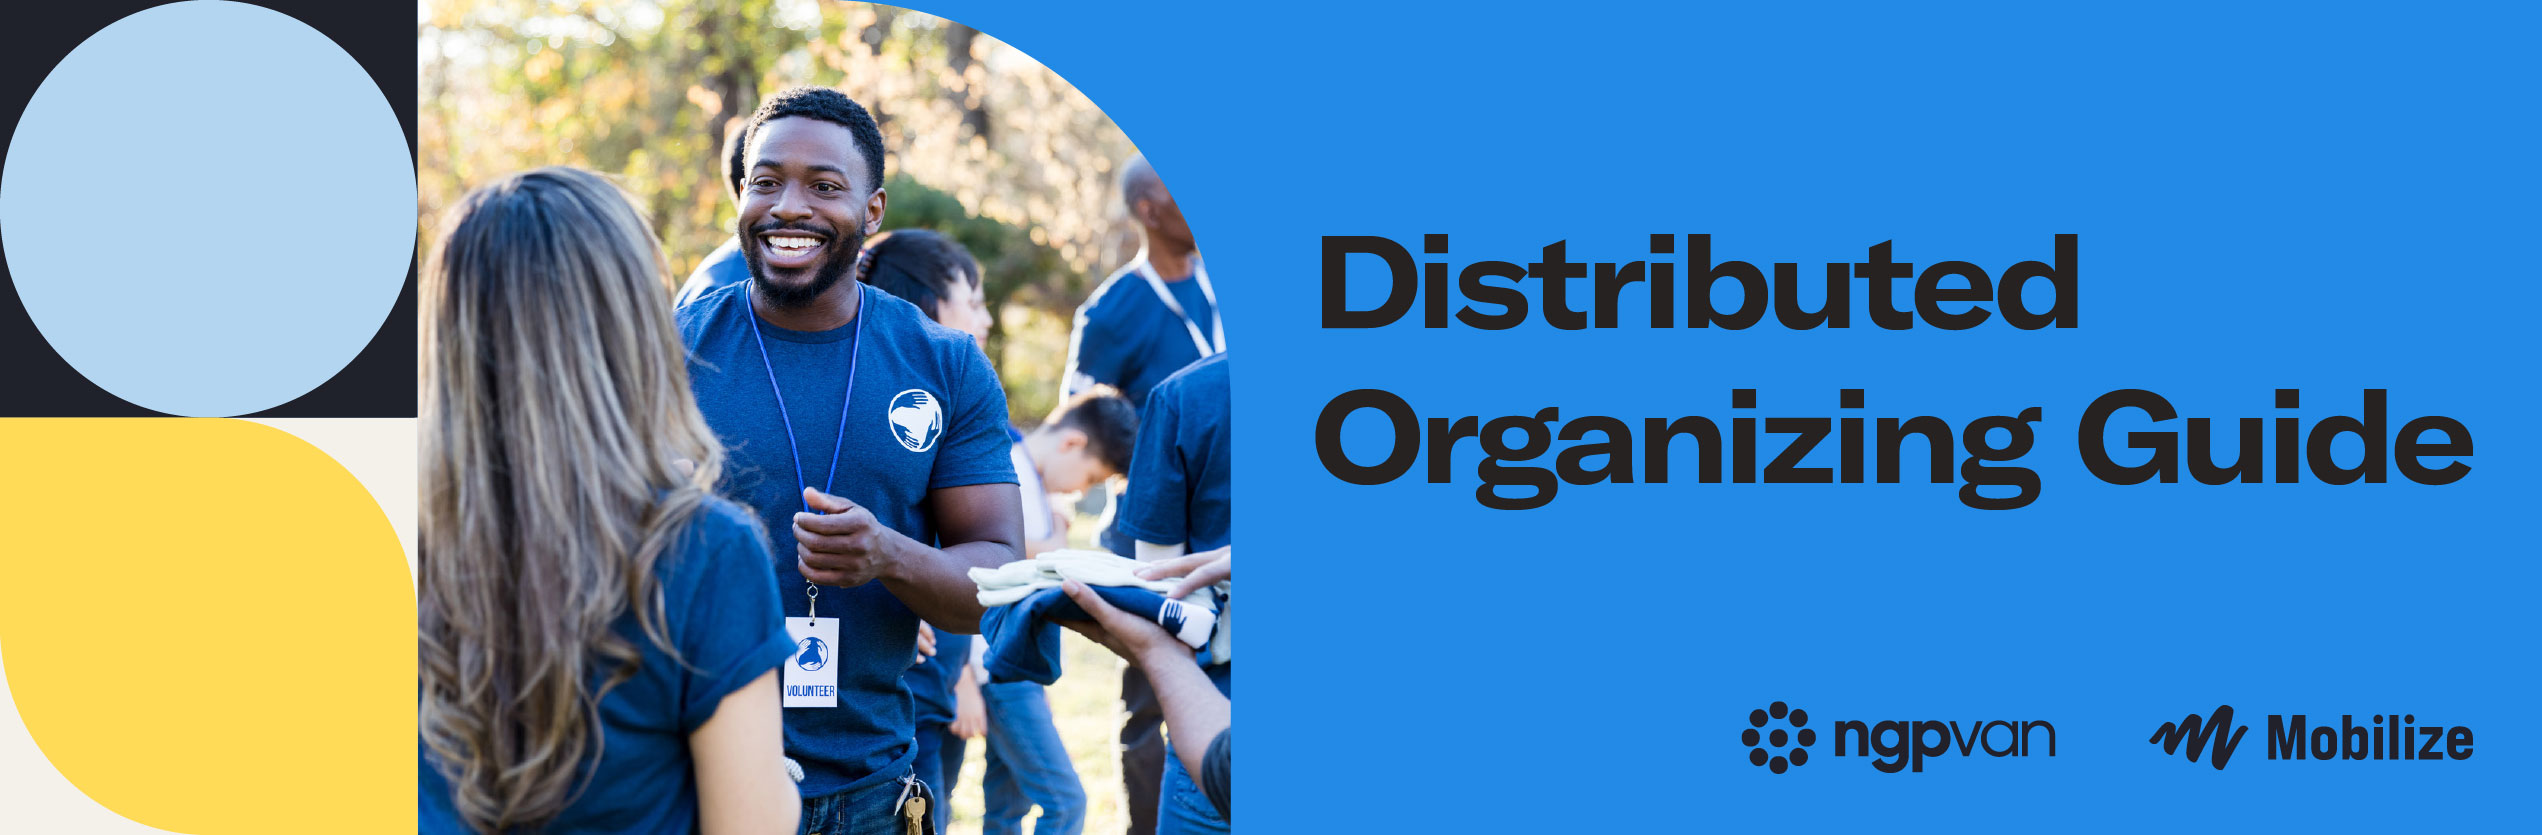 Download the Distributed Organizing Guide